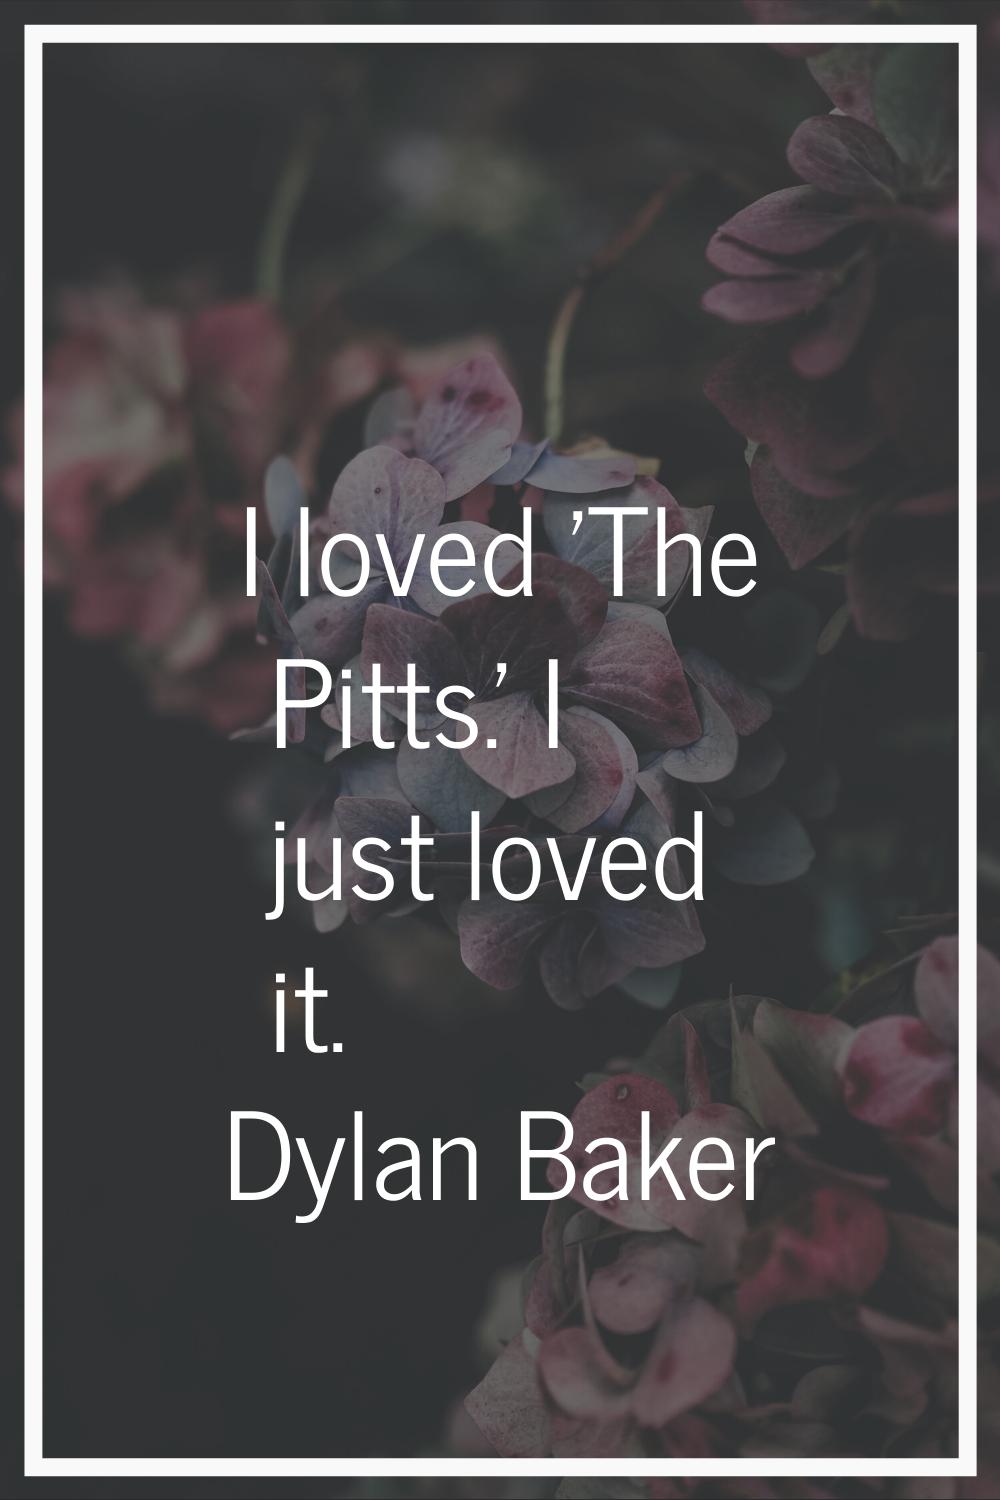 I loved 'The Pitts.' I just loved it.